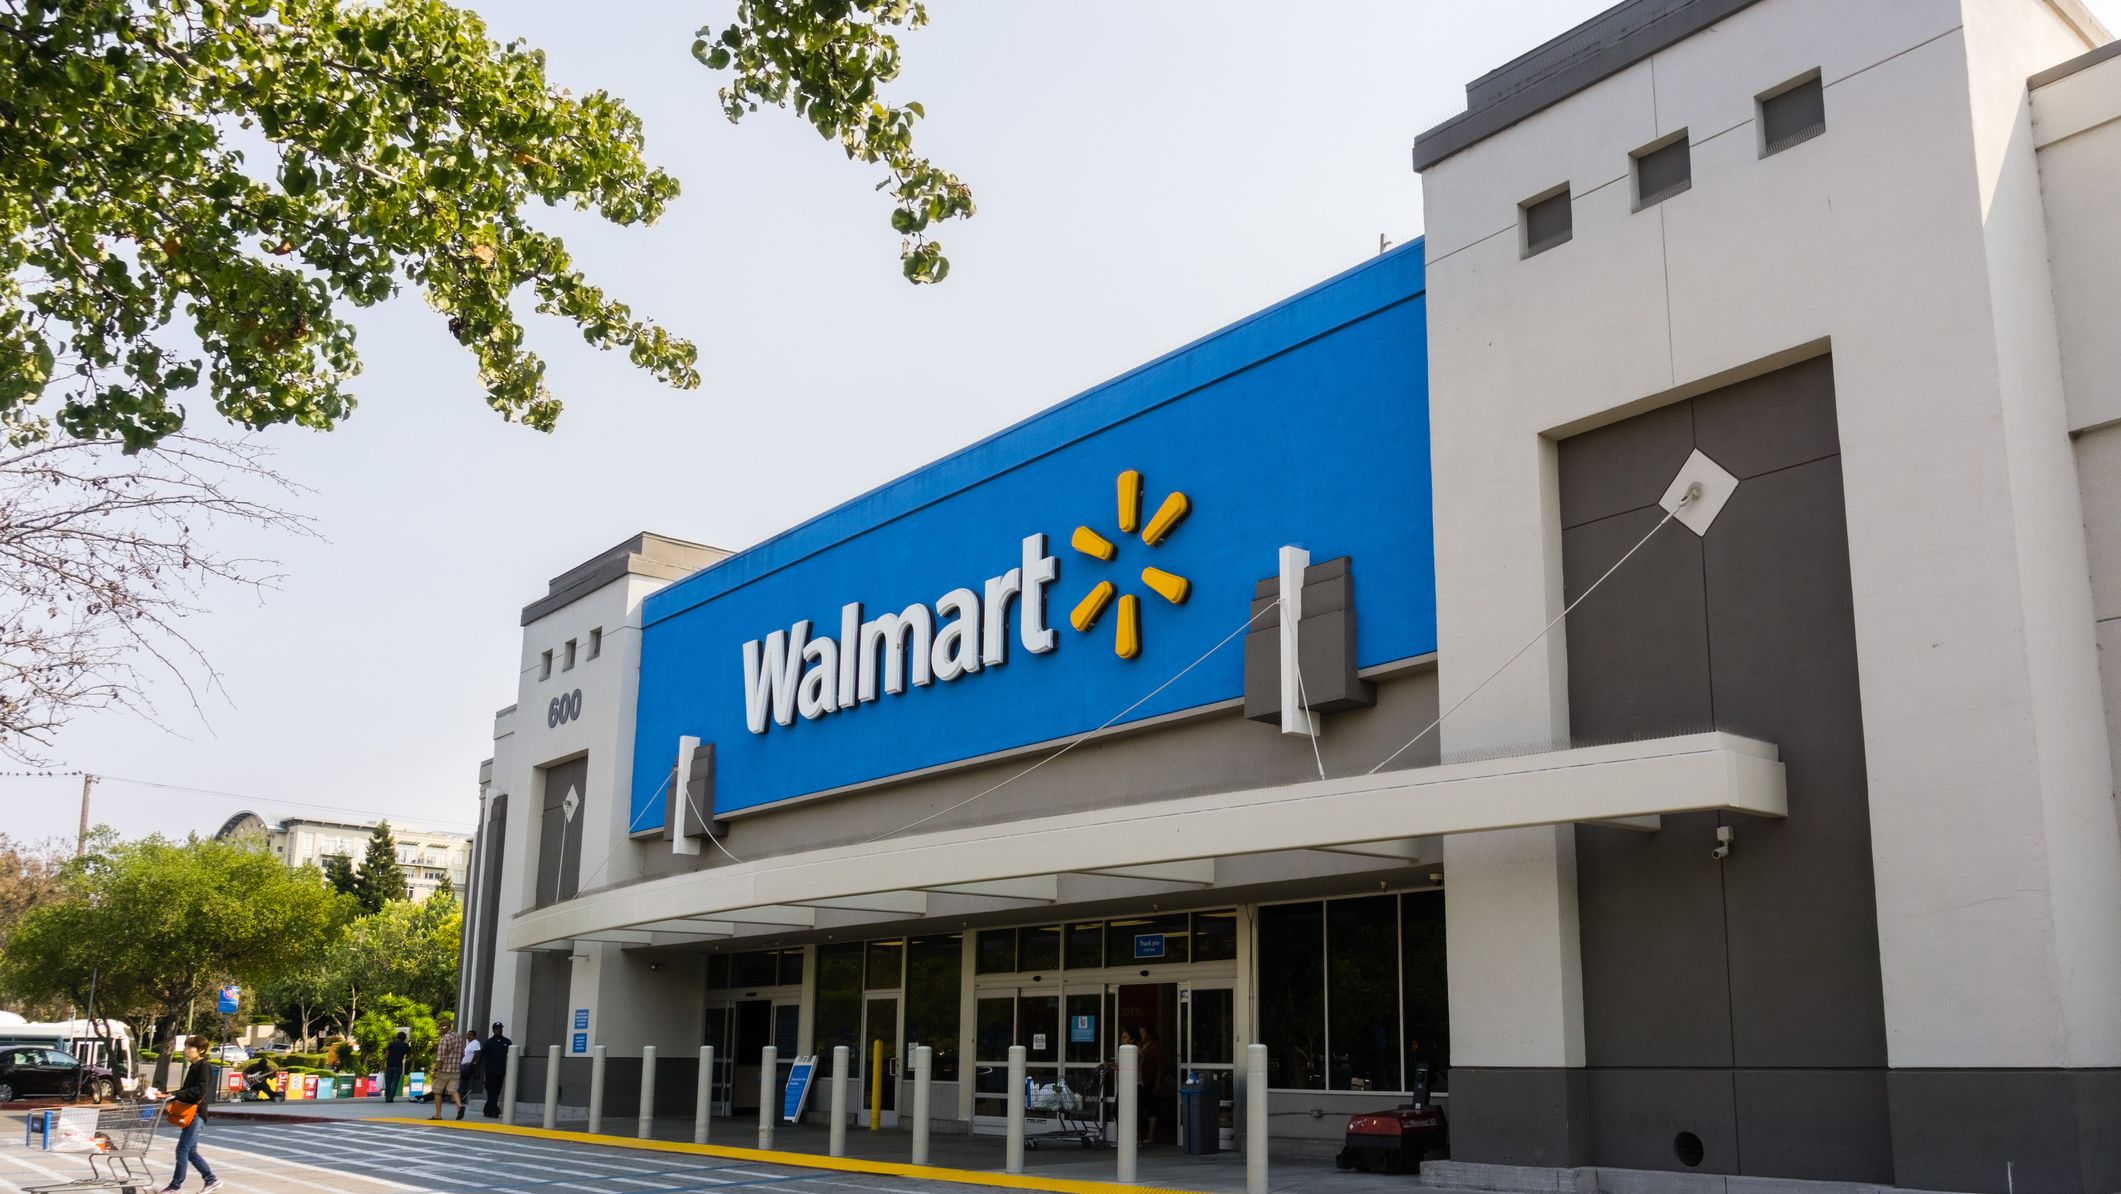 How to Order Groceries Online at Walmart for Pickup and Delivery - Is  Walmart Still Doing Grocery Pickup?